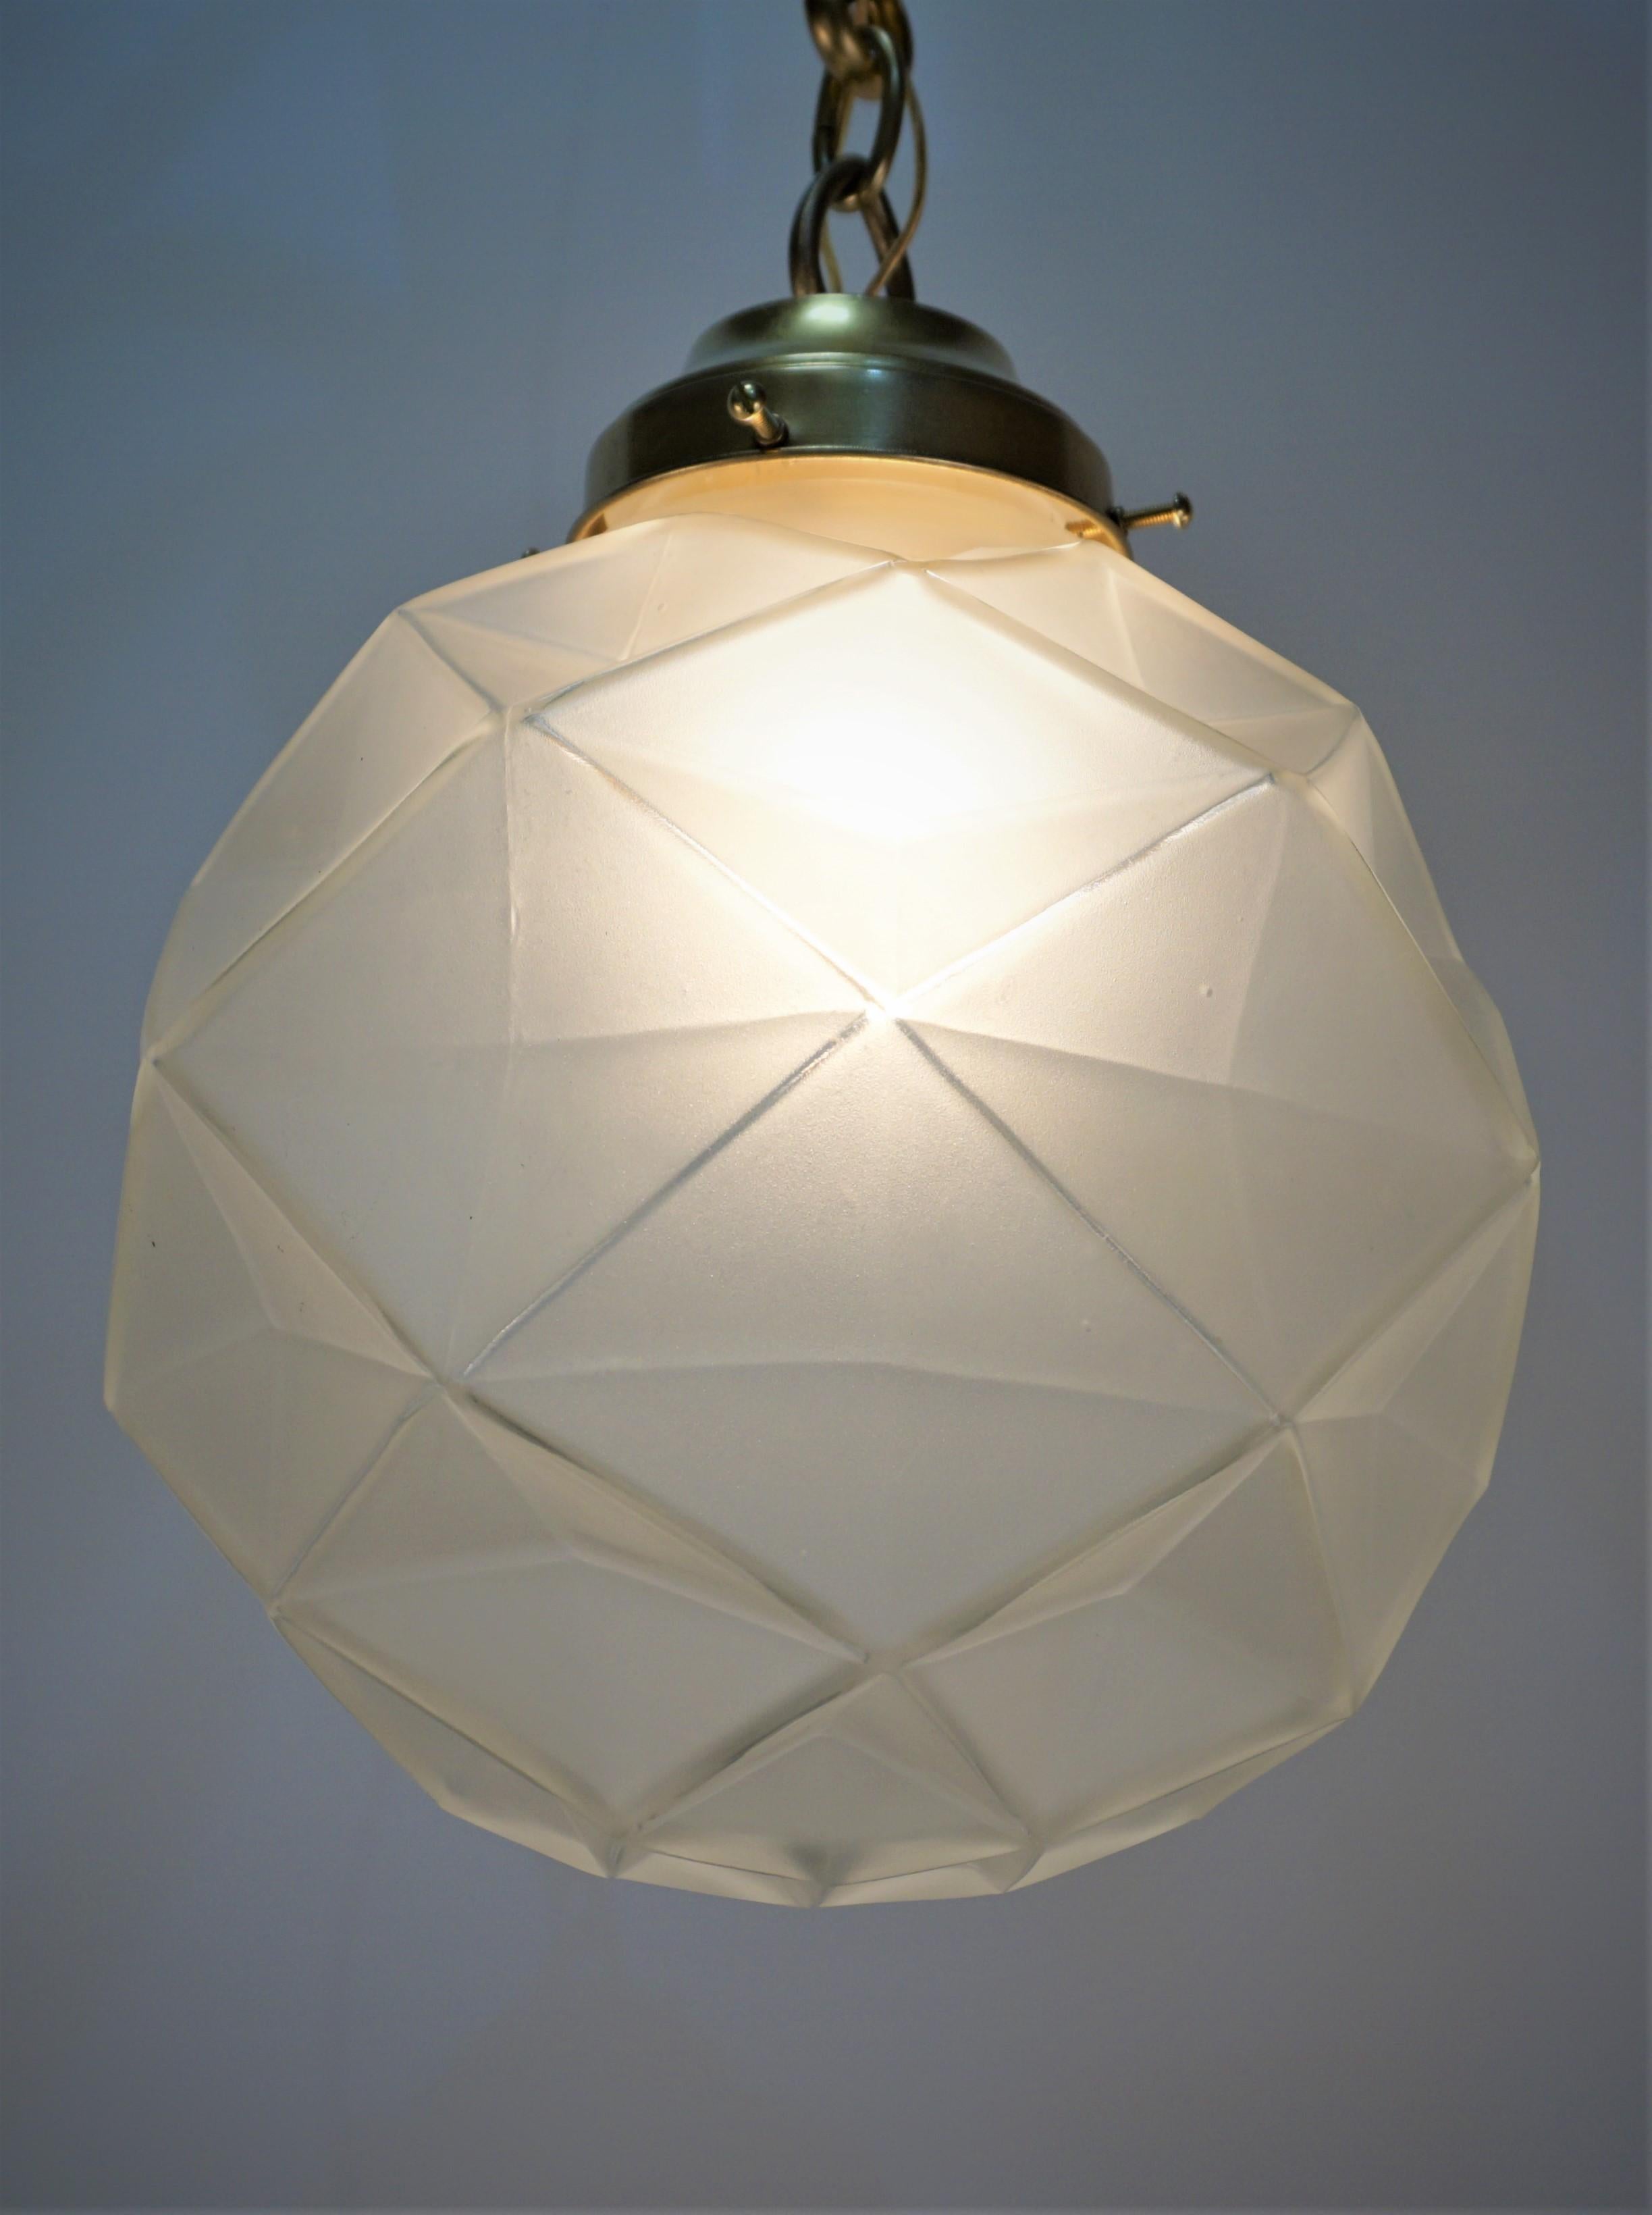 Beautiful clear frost geometric design glass globe pendent chandelier with bronze hardware.
Single bulb 250watts max.